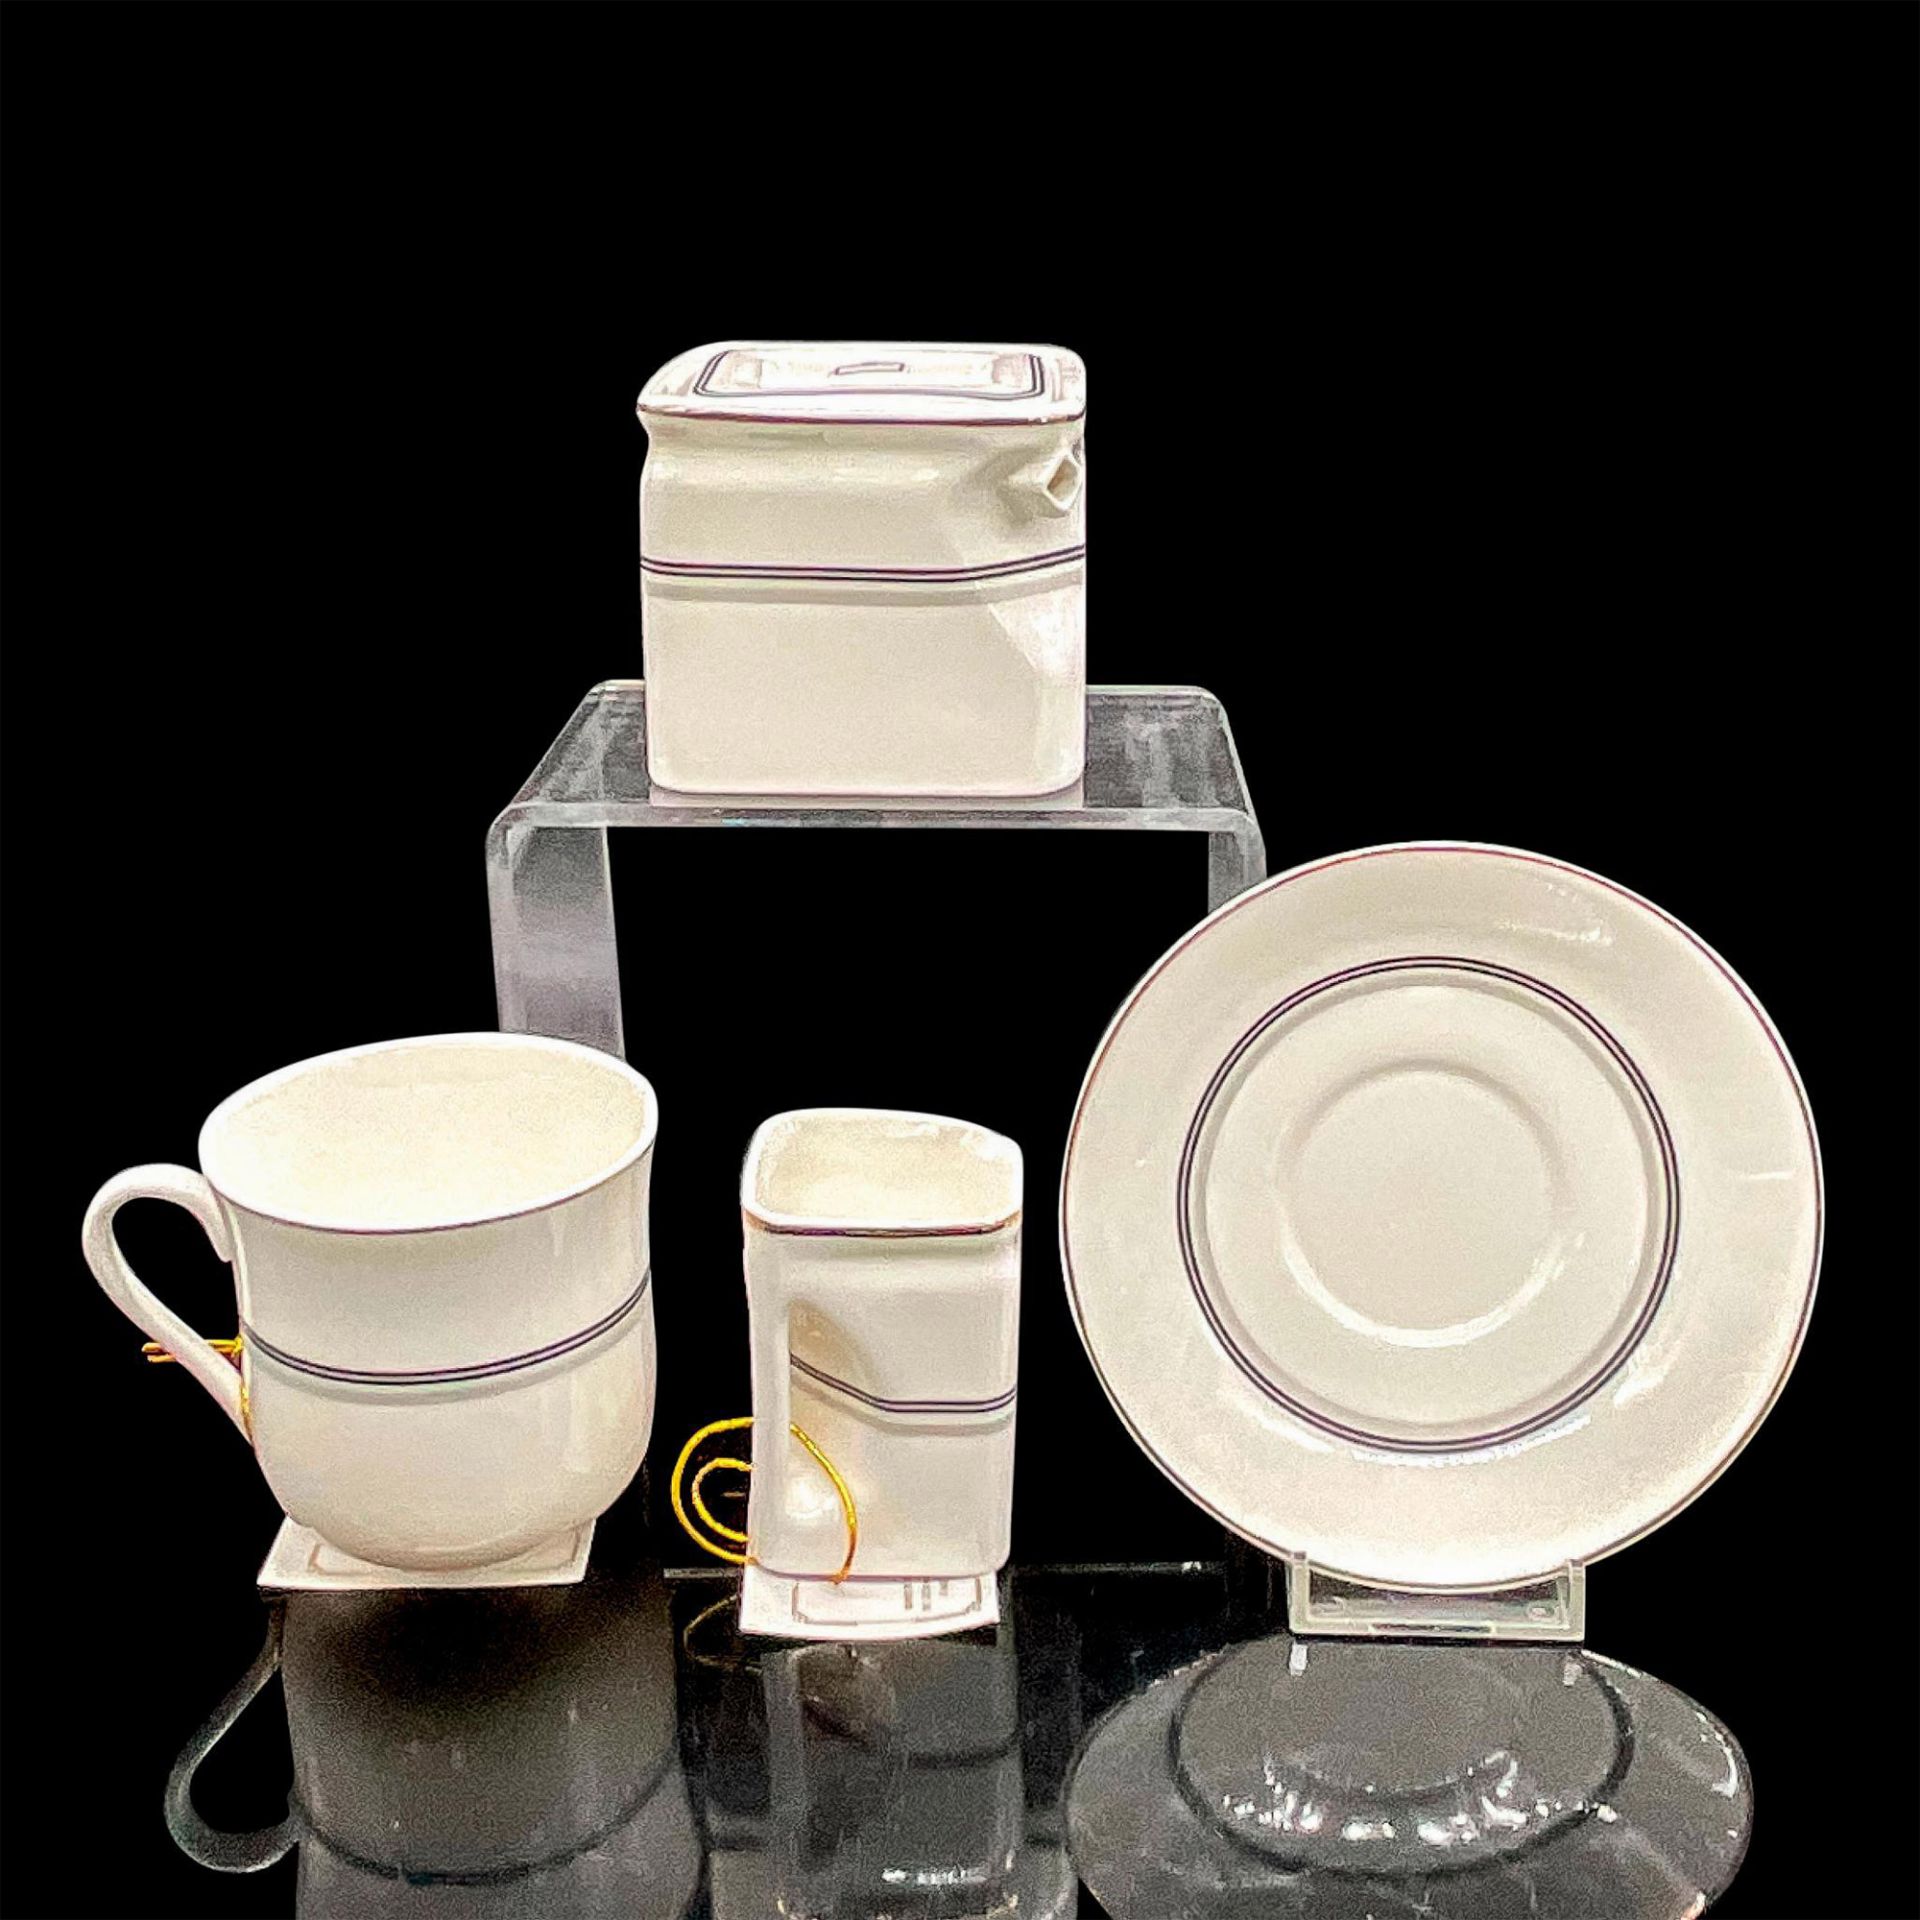 6pc Tea Serving Set, Queen Mary and Titanic Replicas - Image 3 of 16